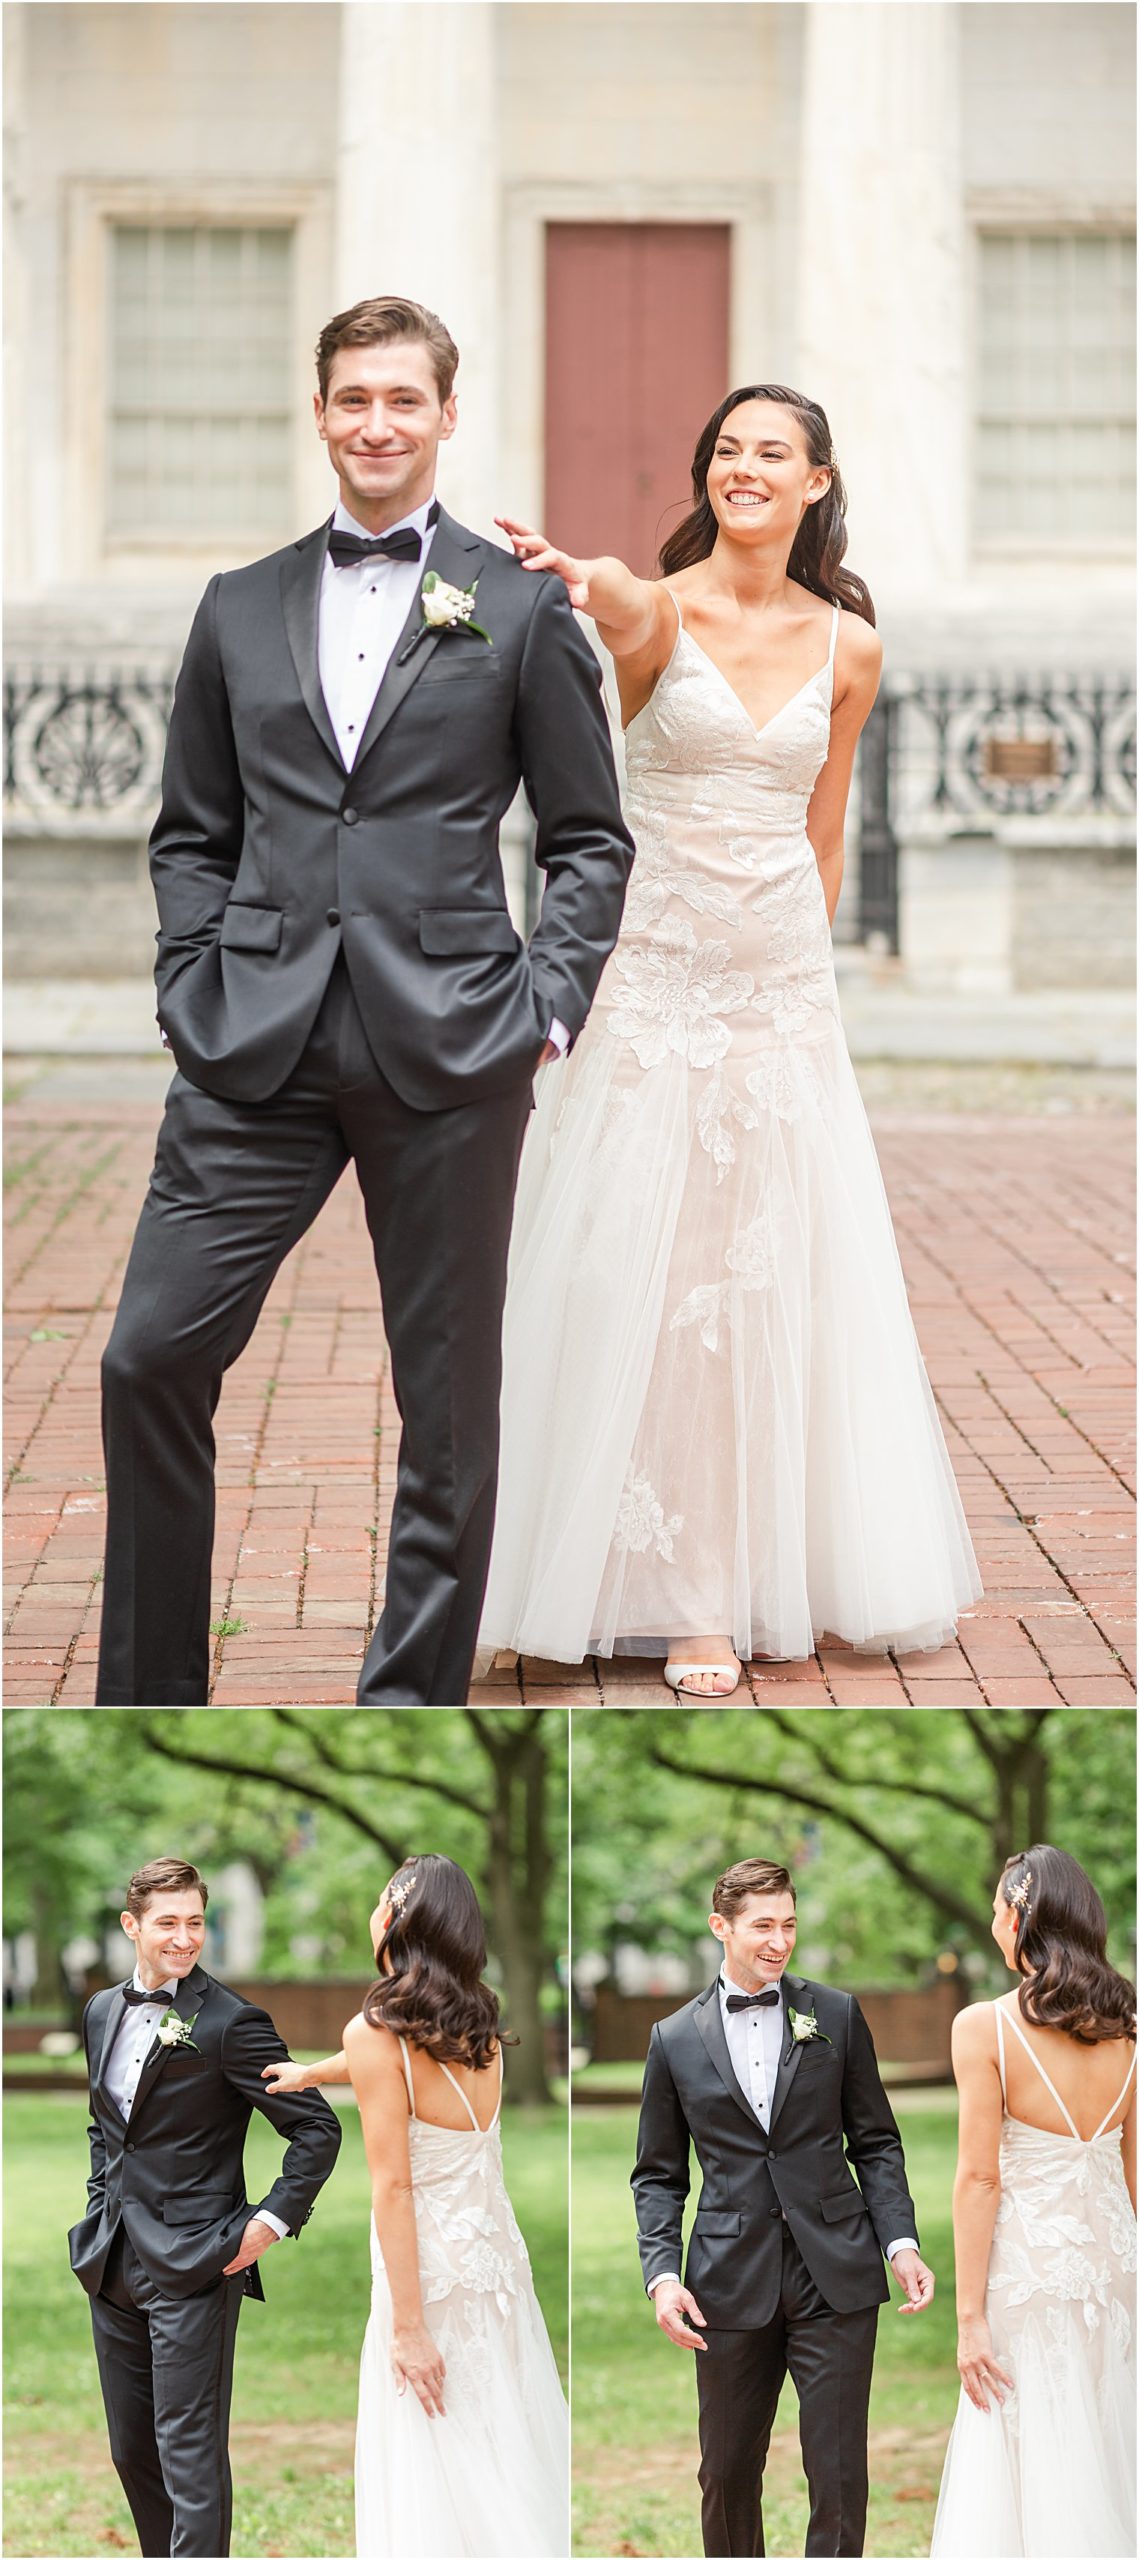 Bride + Groom share first look moment at Second National Bank